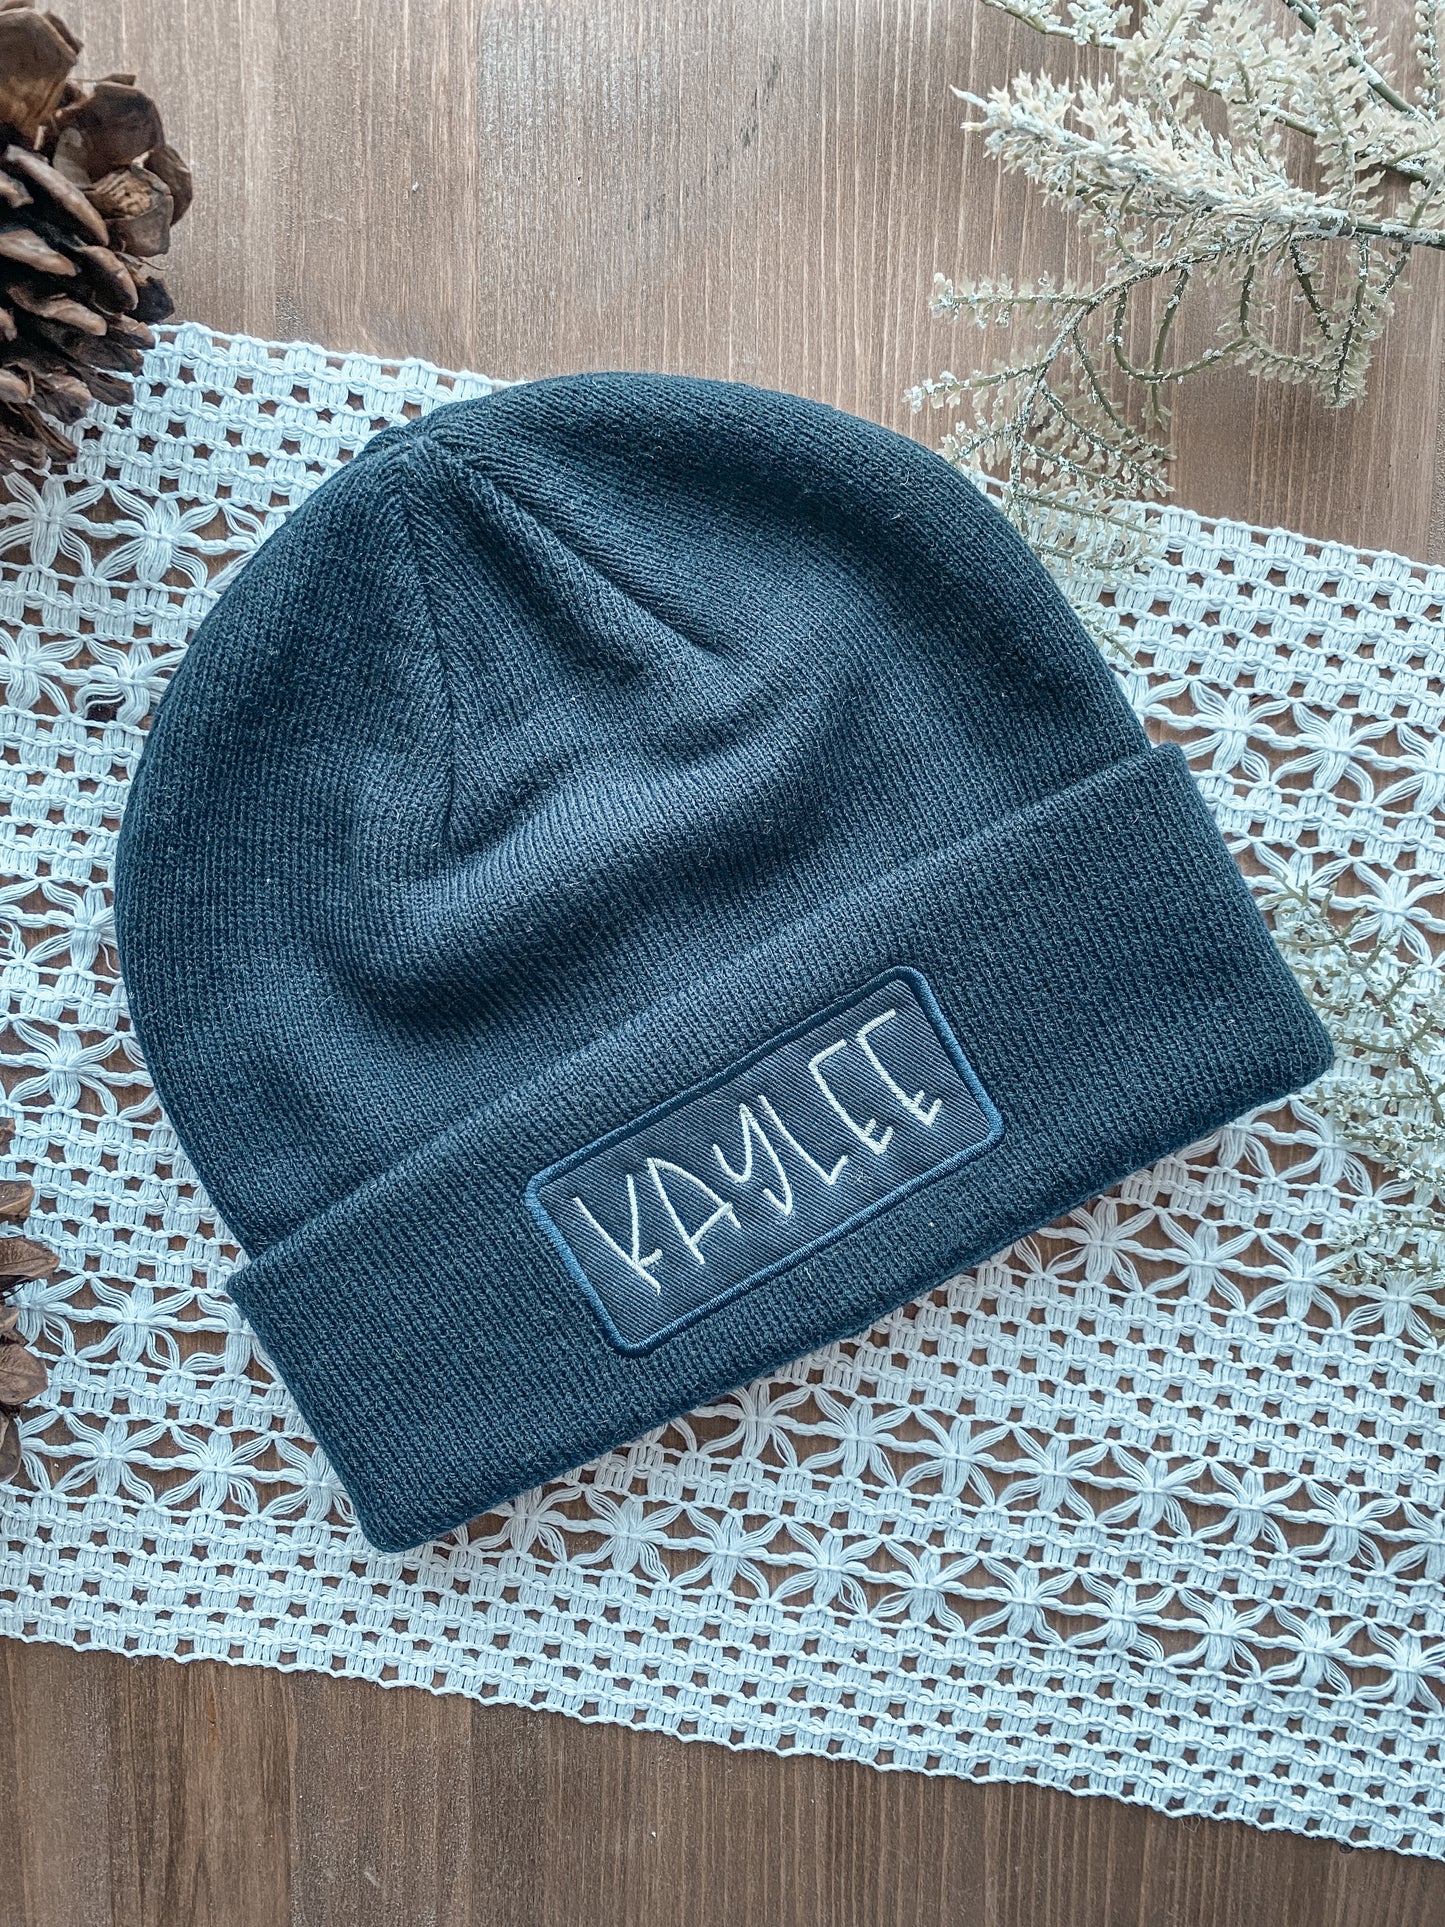 Personalized Name Beanie Embroidered